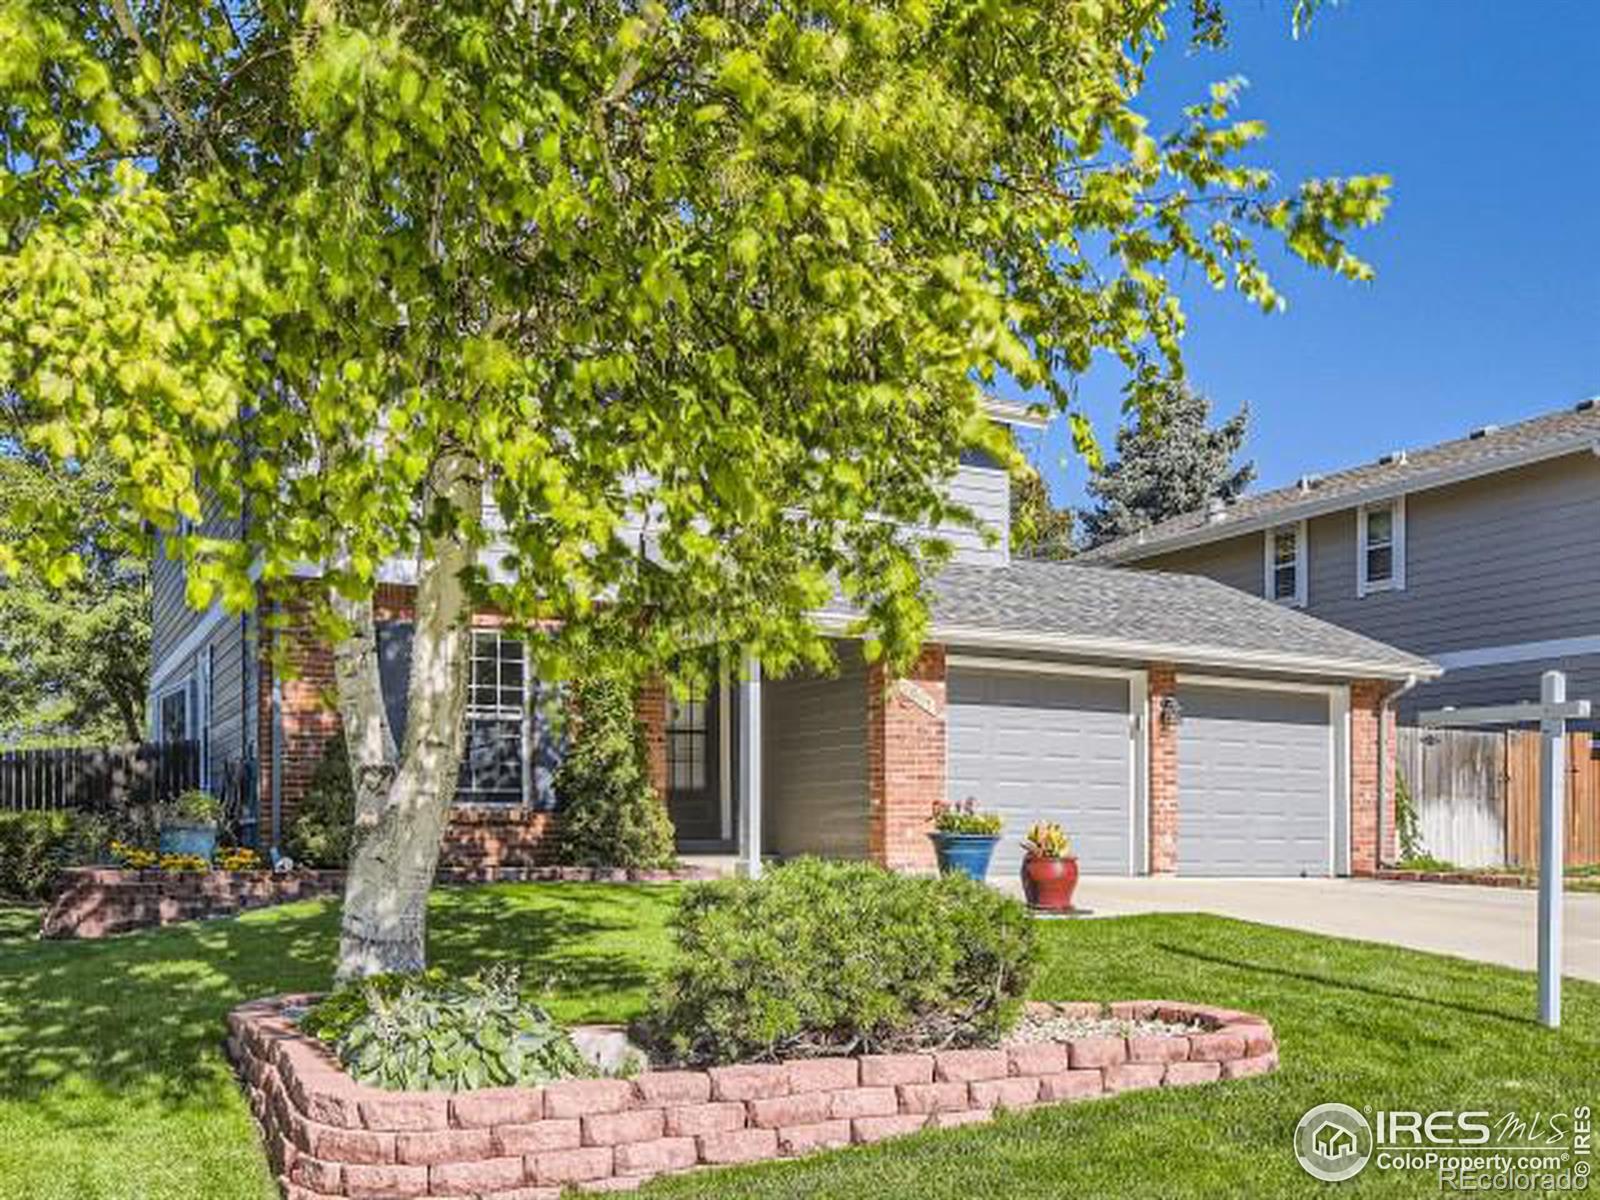 Report Image for 7861 S Ulster Street,Centennial, Colorado